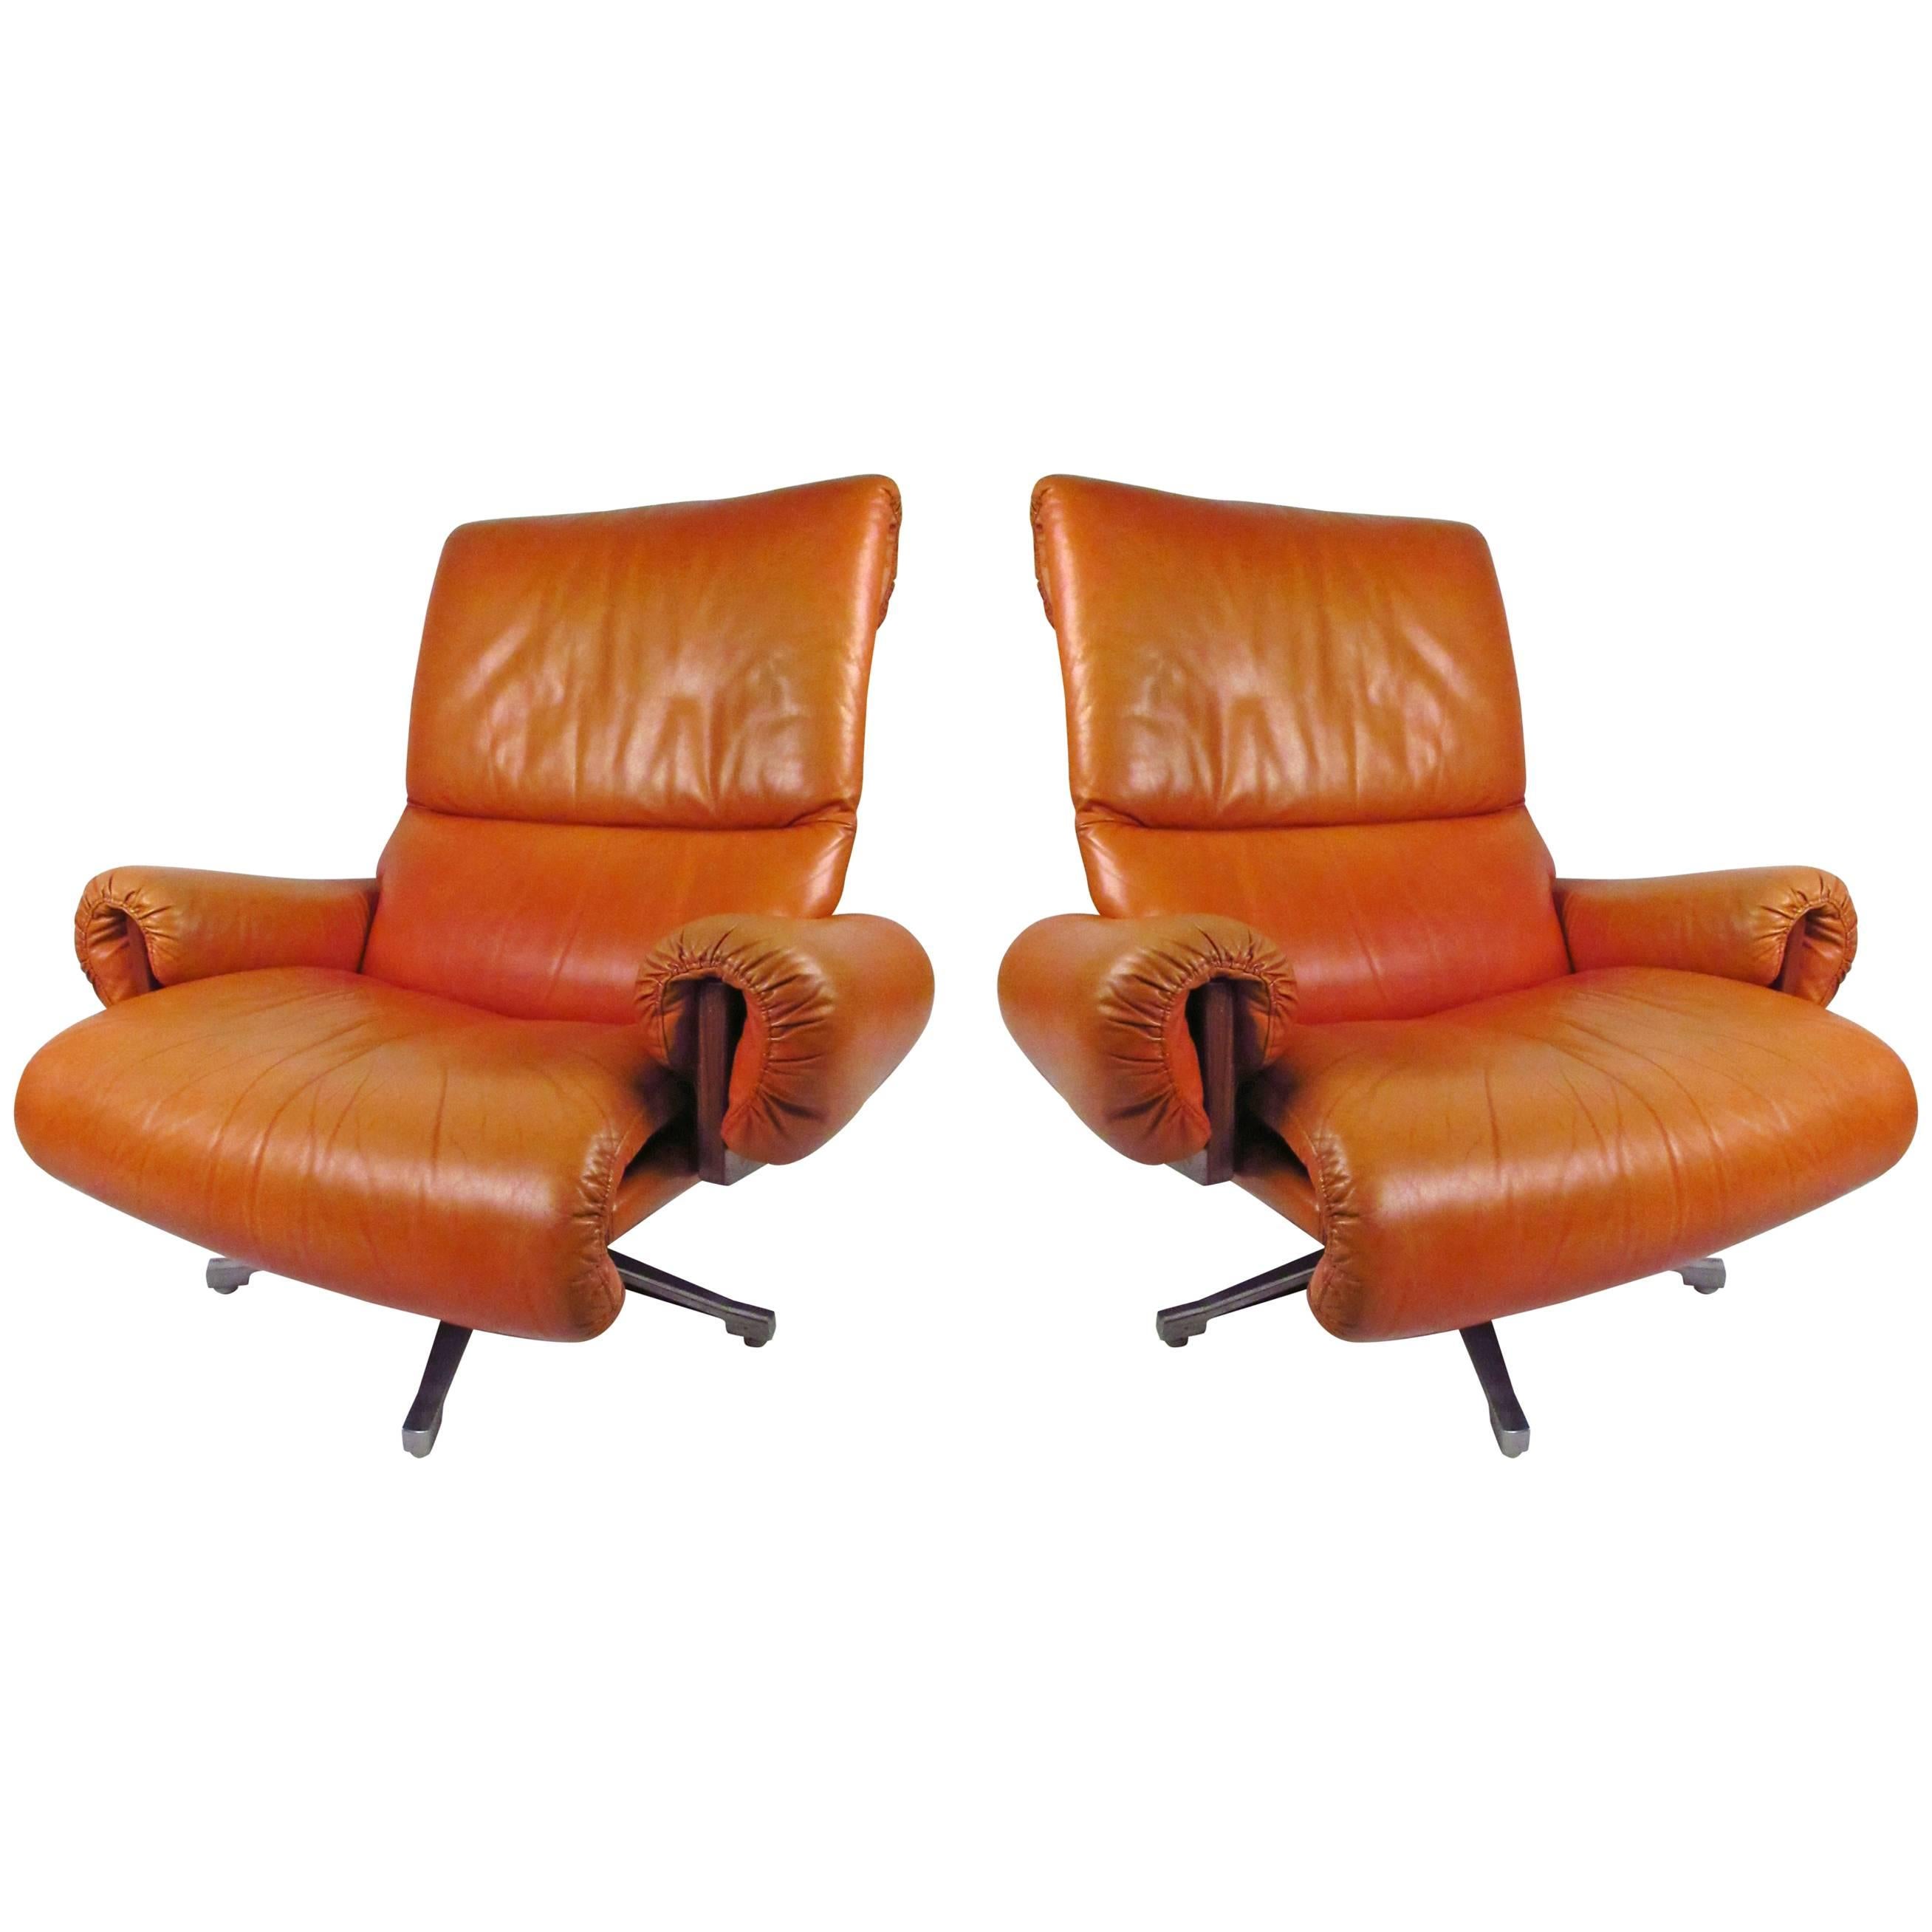 Pair of Vintage Rosewood and Leather Swivel Lounge Chairs